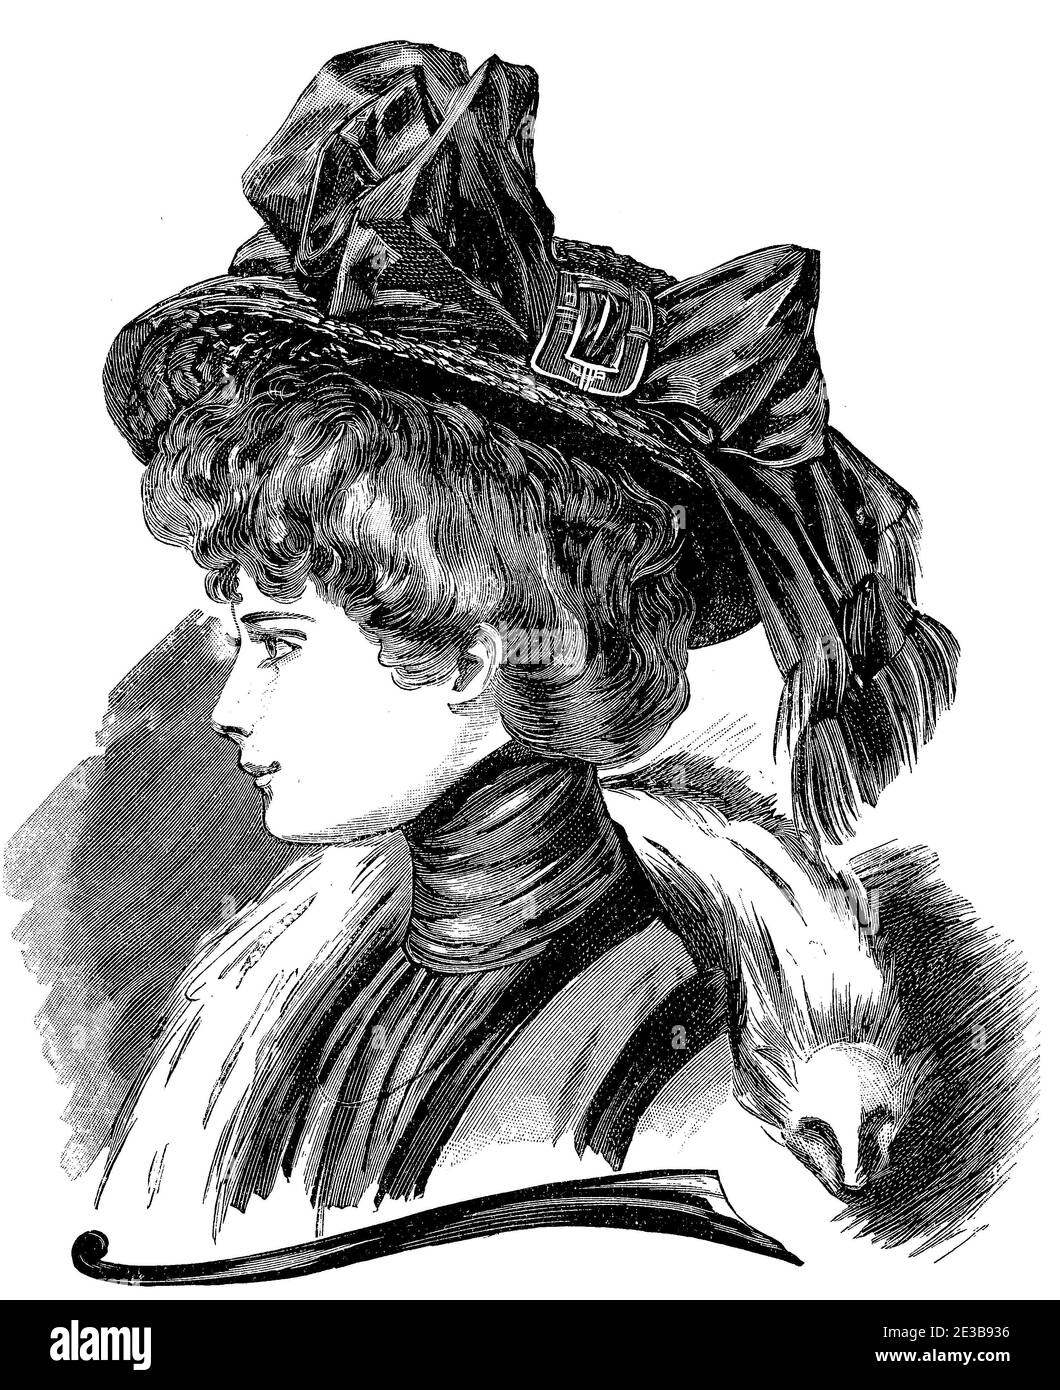 Ladies hat and hairdressing fashion 1907,  broad hats with bow, Gibson girl hairstyle with piled up hairs, chiffon blouse and white fox stole Stock Photo